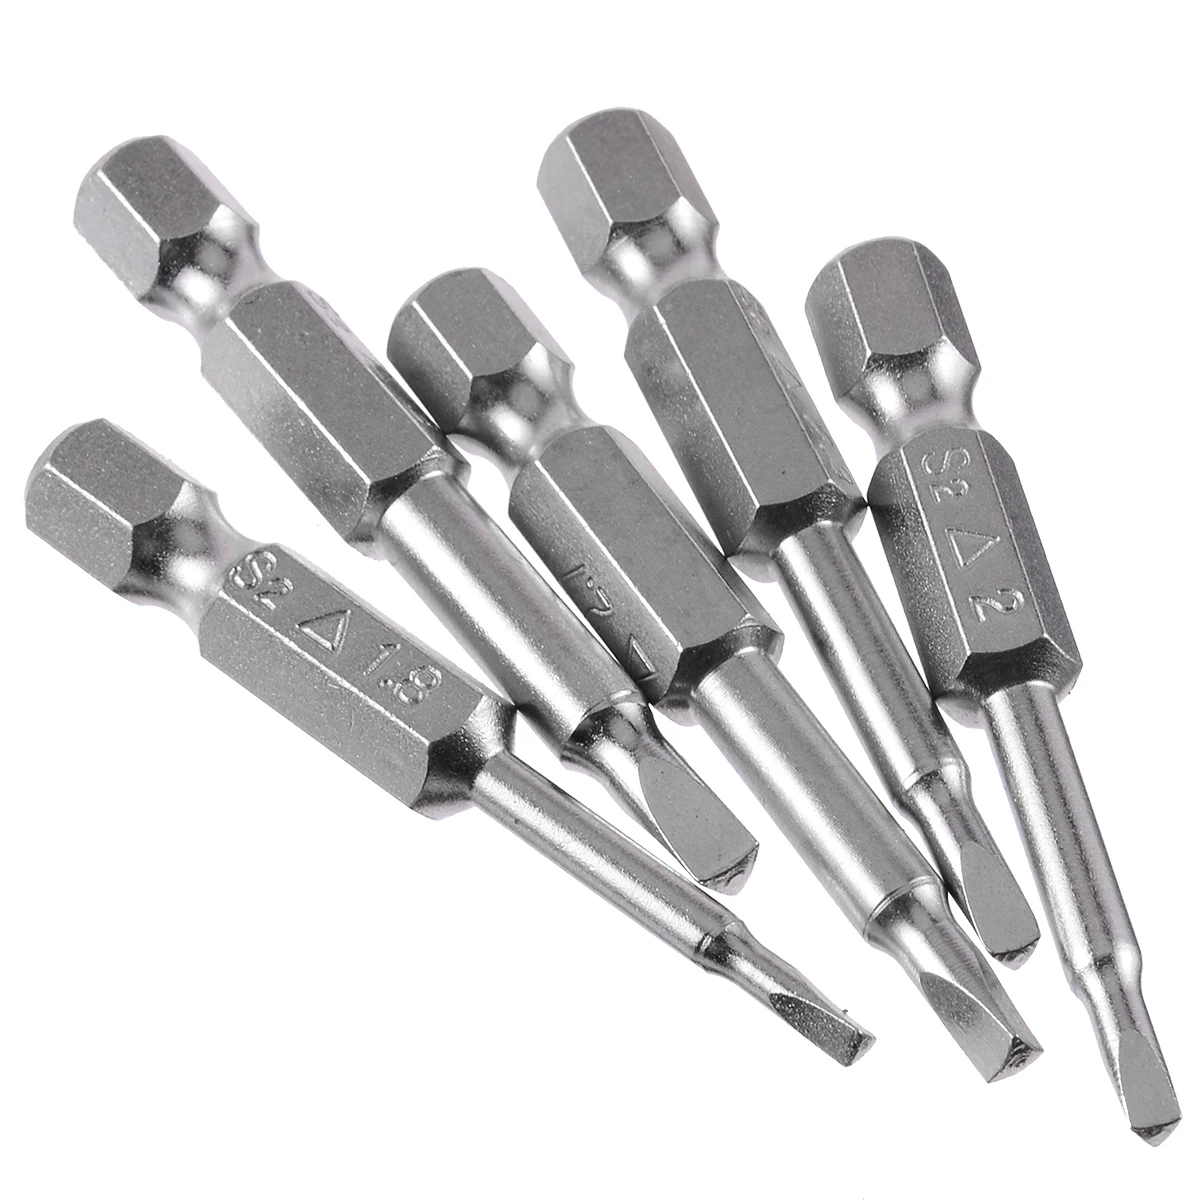 Rocaris 5 Pieces in One Set Magnetic Triangle Head Screwdriver Bits S2 Steel 1/4 Hex Shank 50mm 